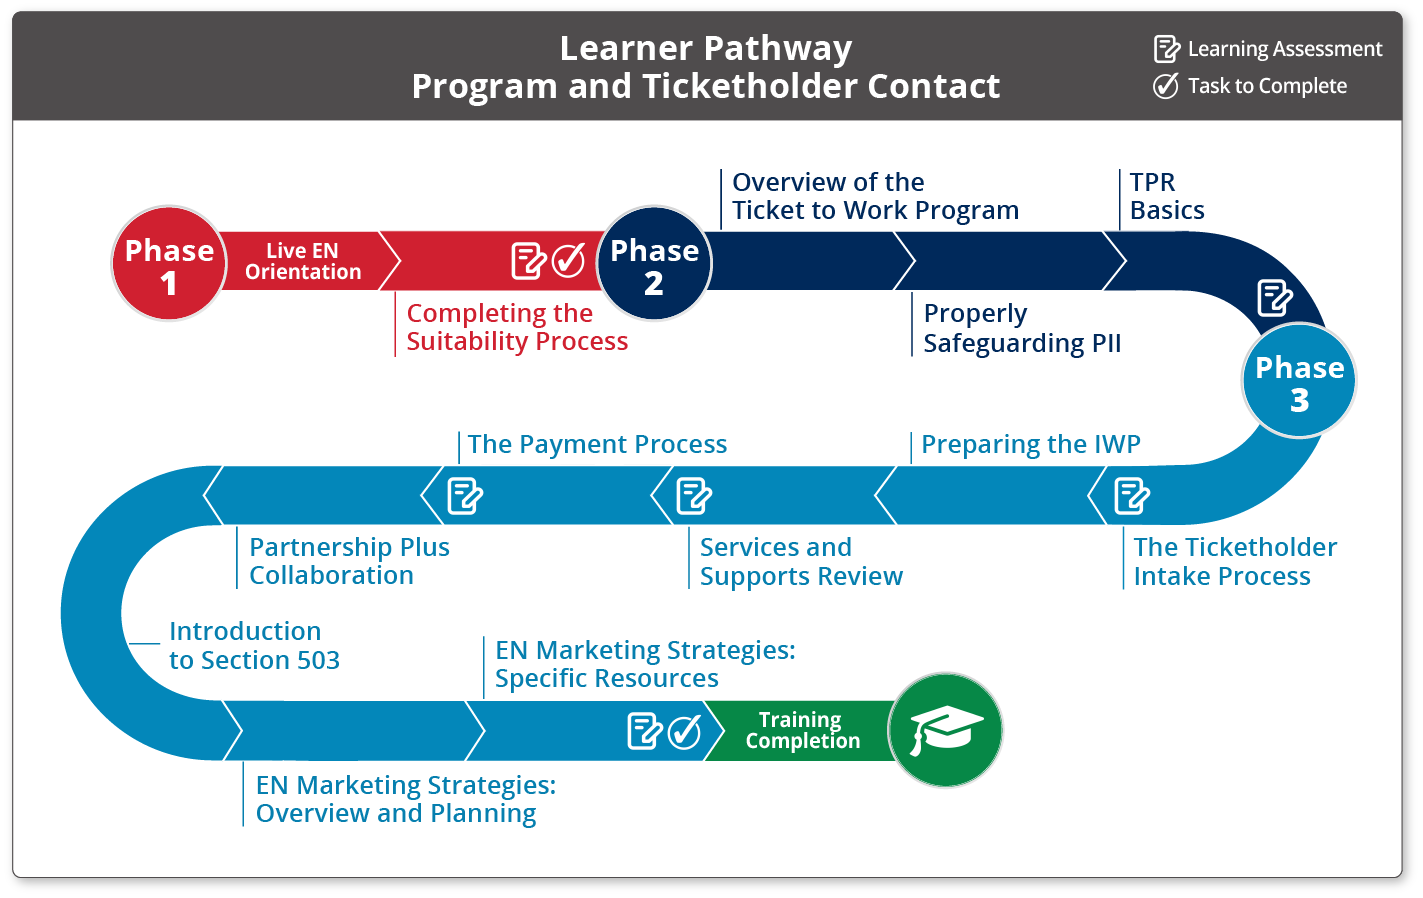 Learner Pathway Program and Ticketholder Contact